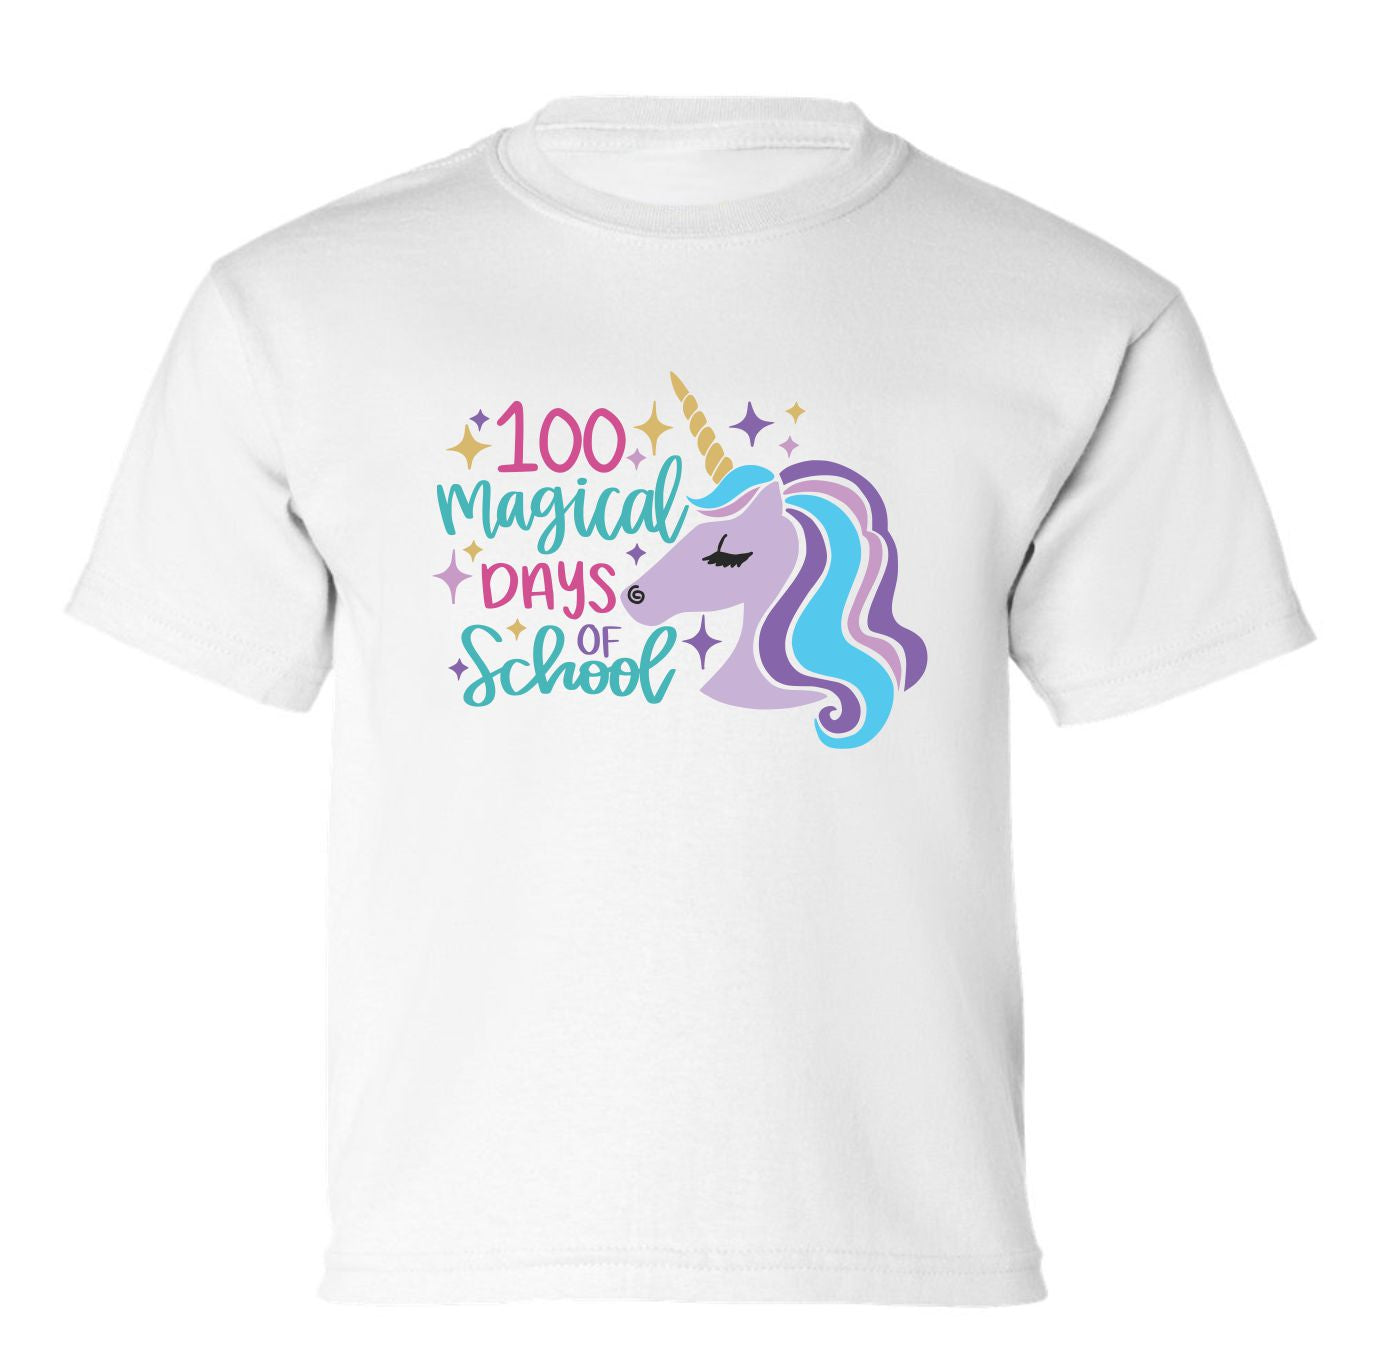 "100 Magical Days of School" Toddler/Youth T-Shirt